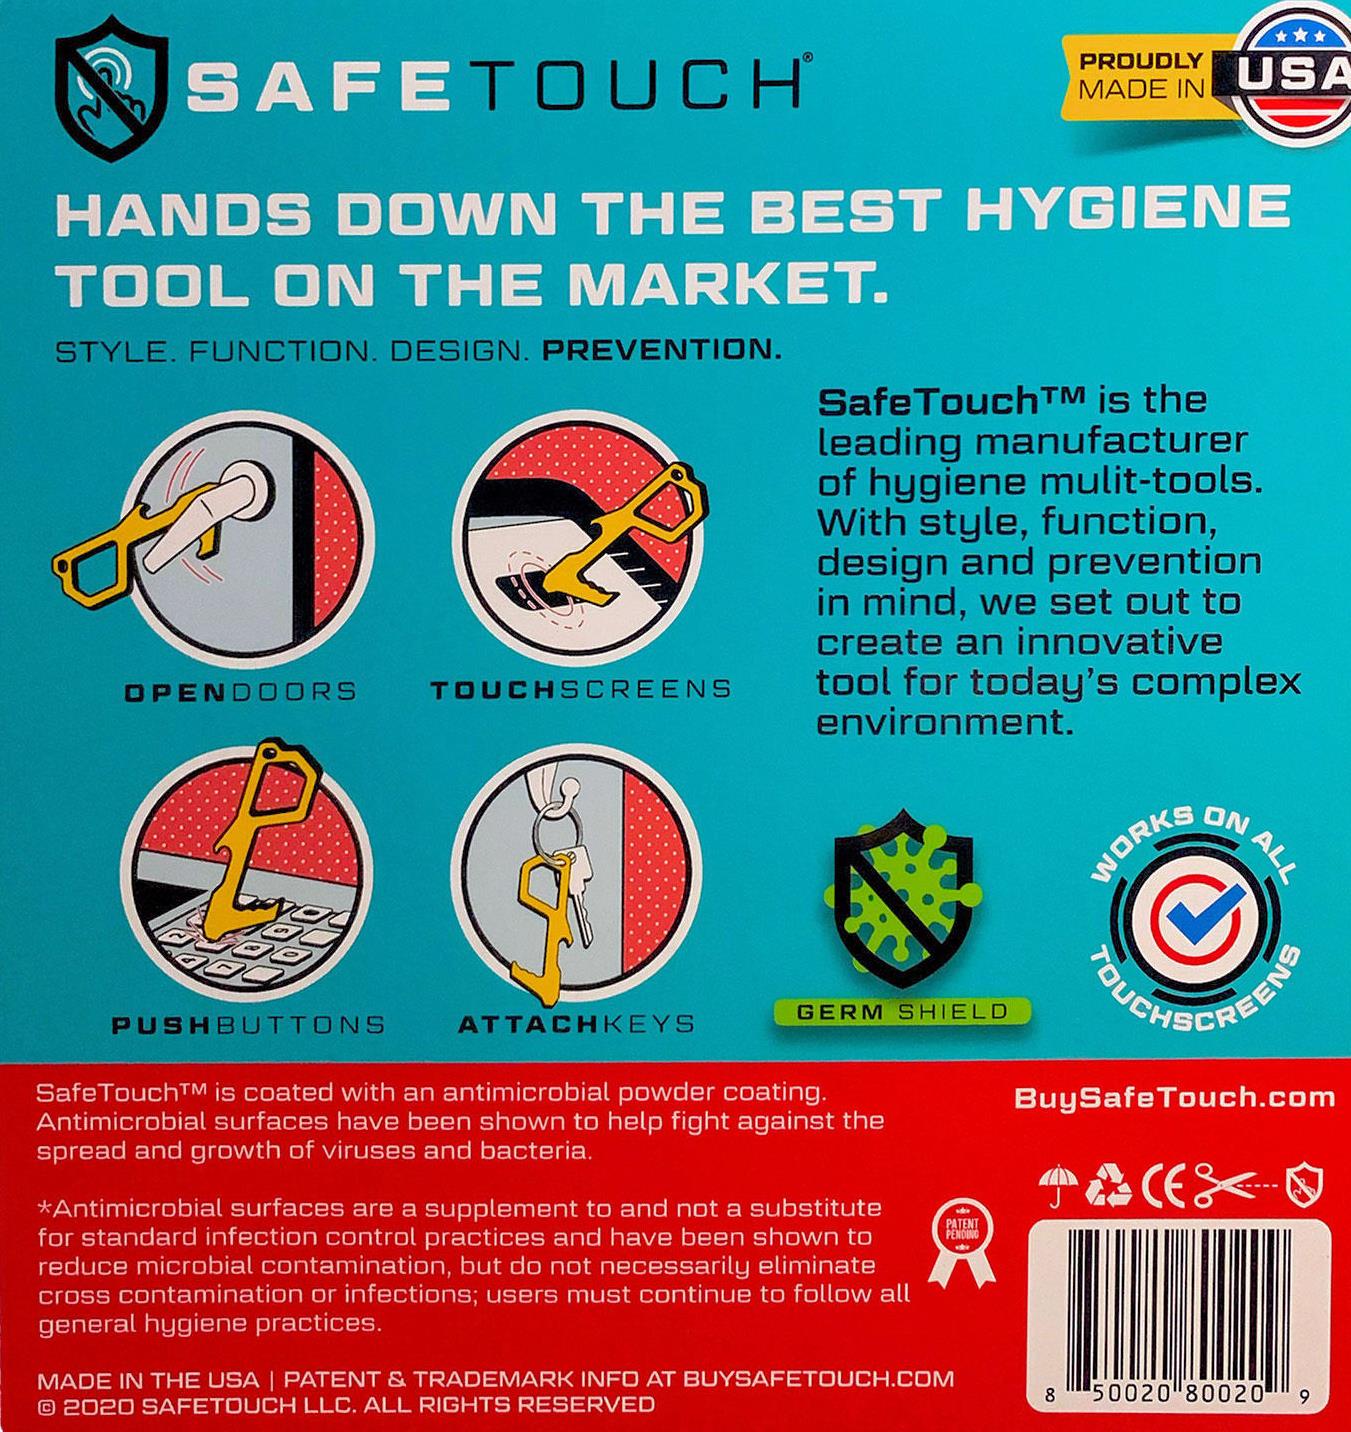 SafeTouch Hygiene Multi-Tool, Works on Touch Screen, Made in USA (2 Pack)